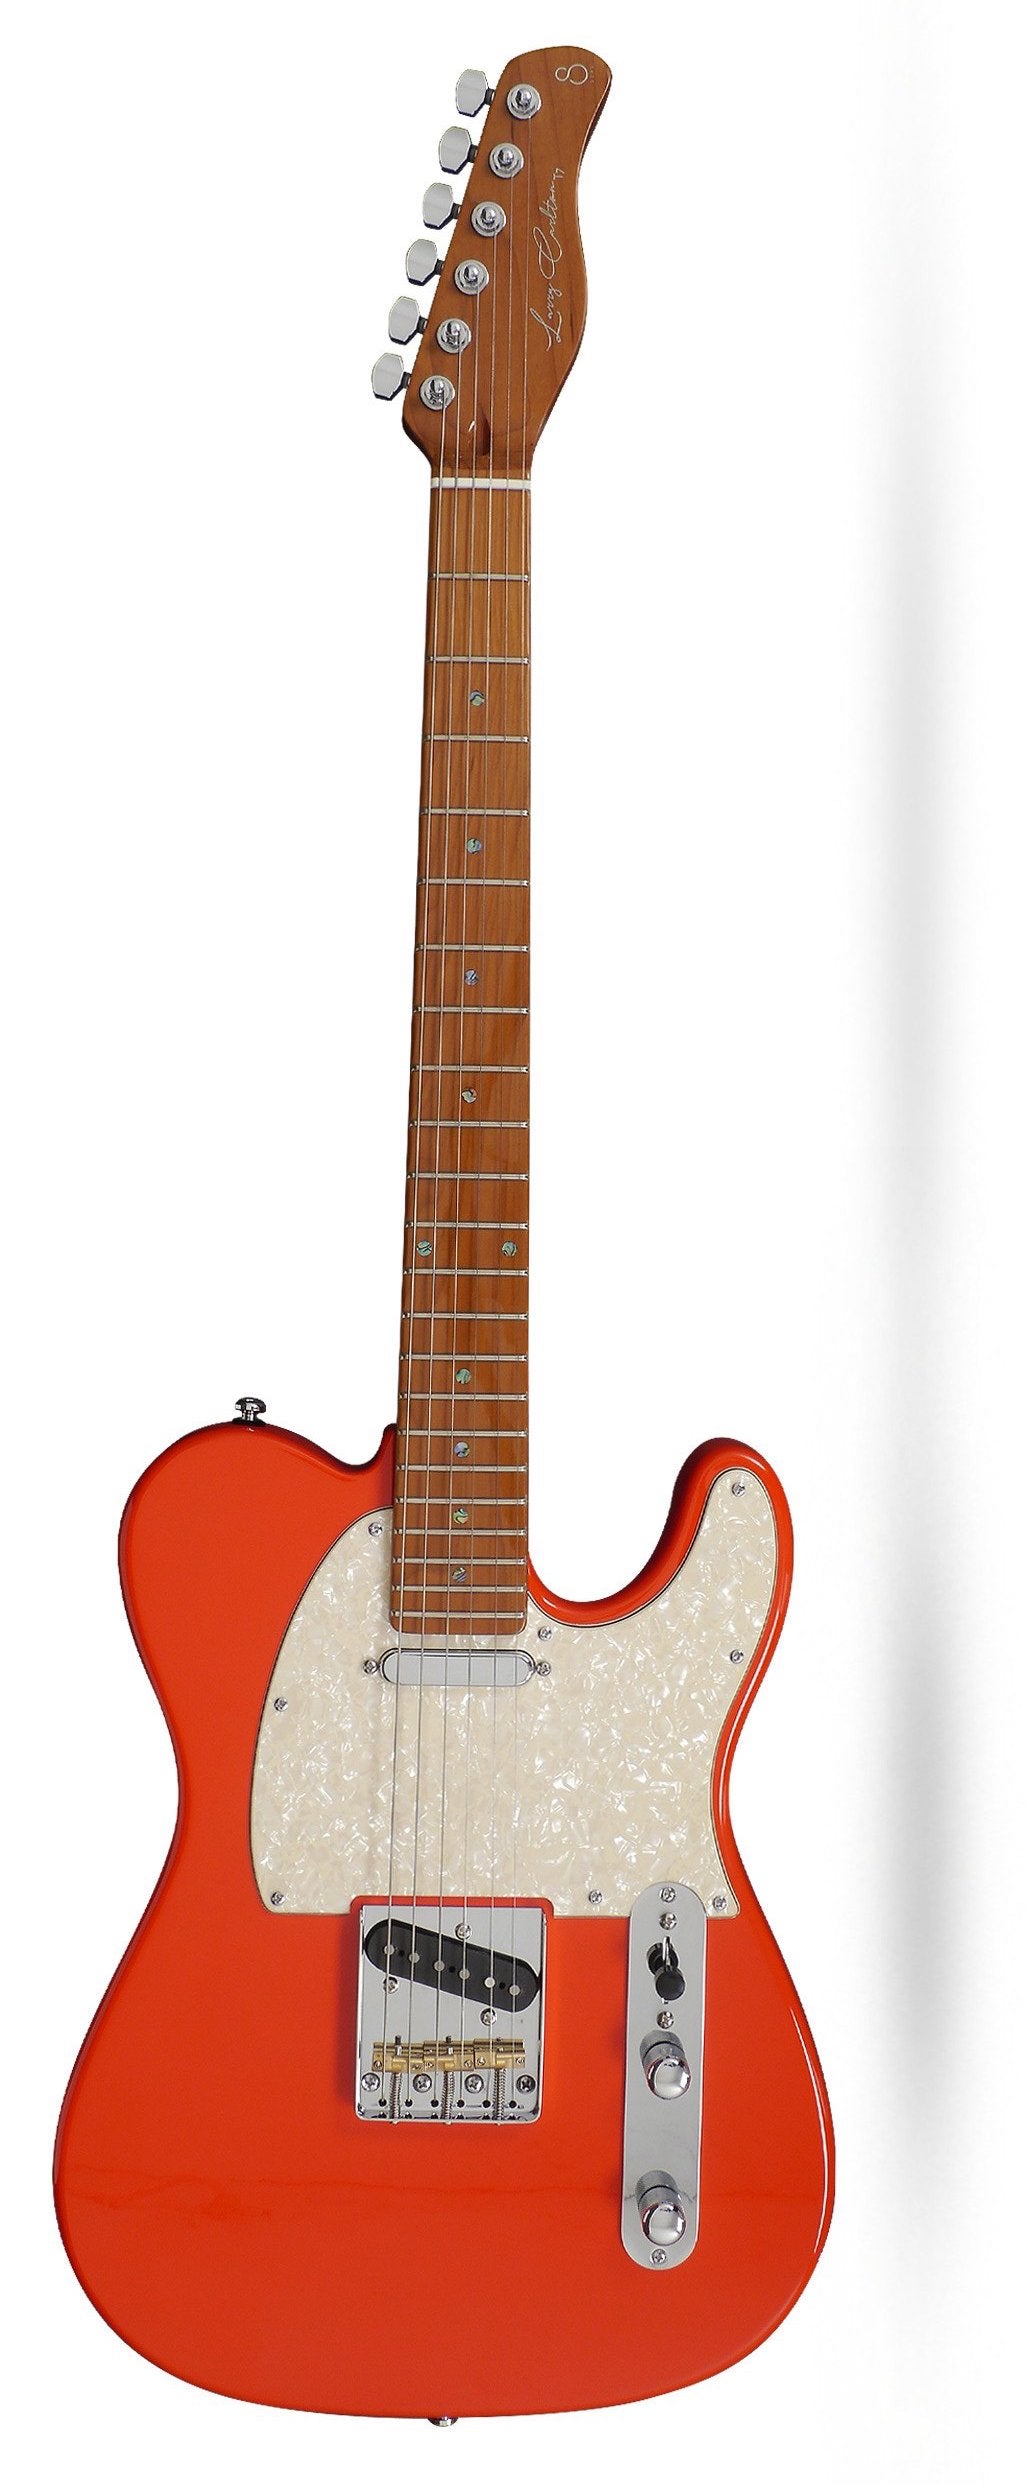 Sire Larry Carlton T7 Sire Electric Guitar - Fiesta Red